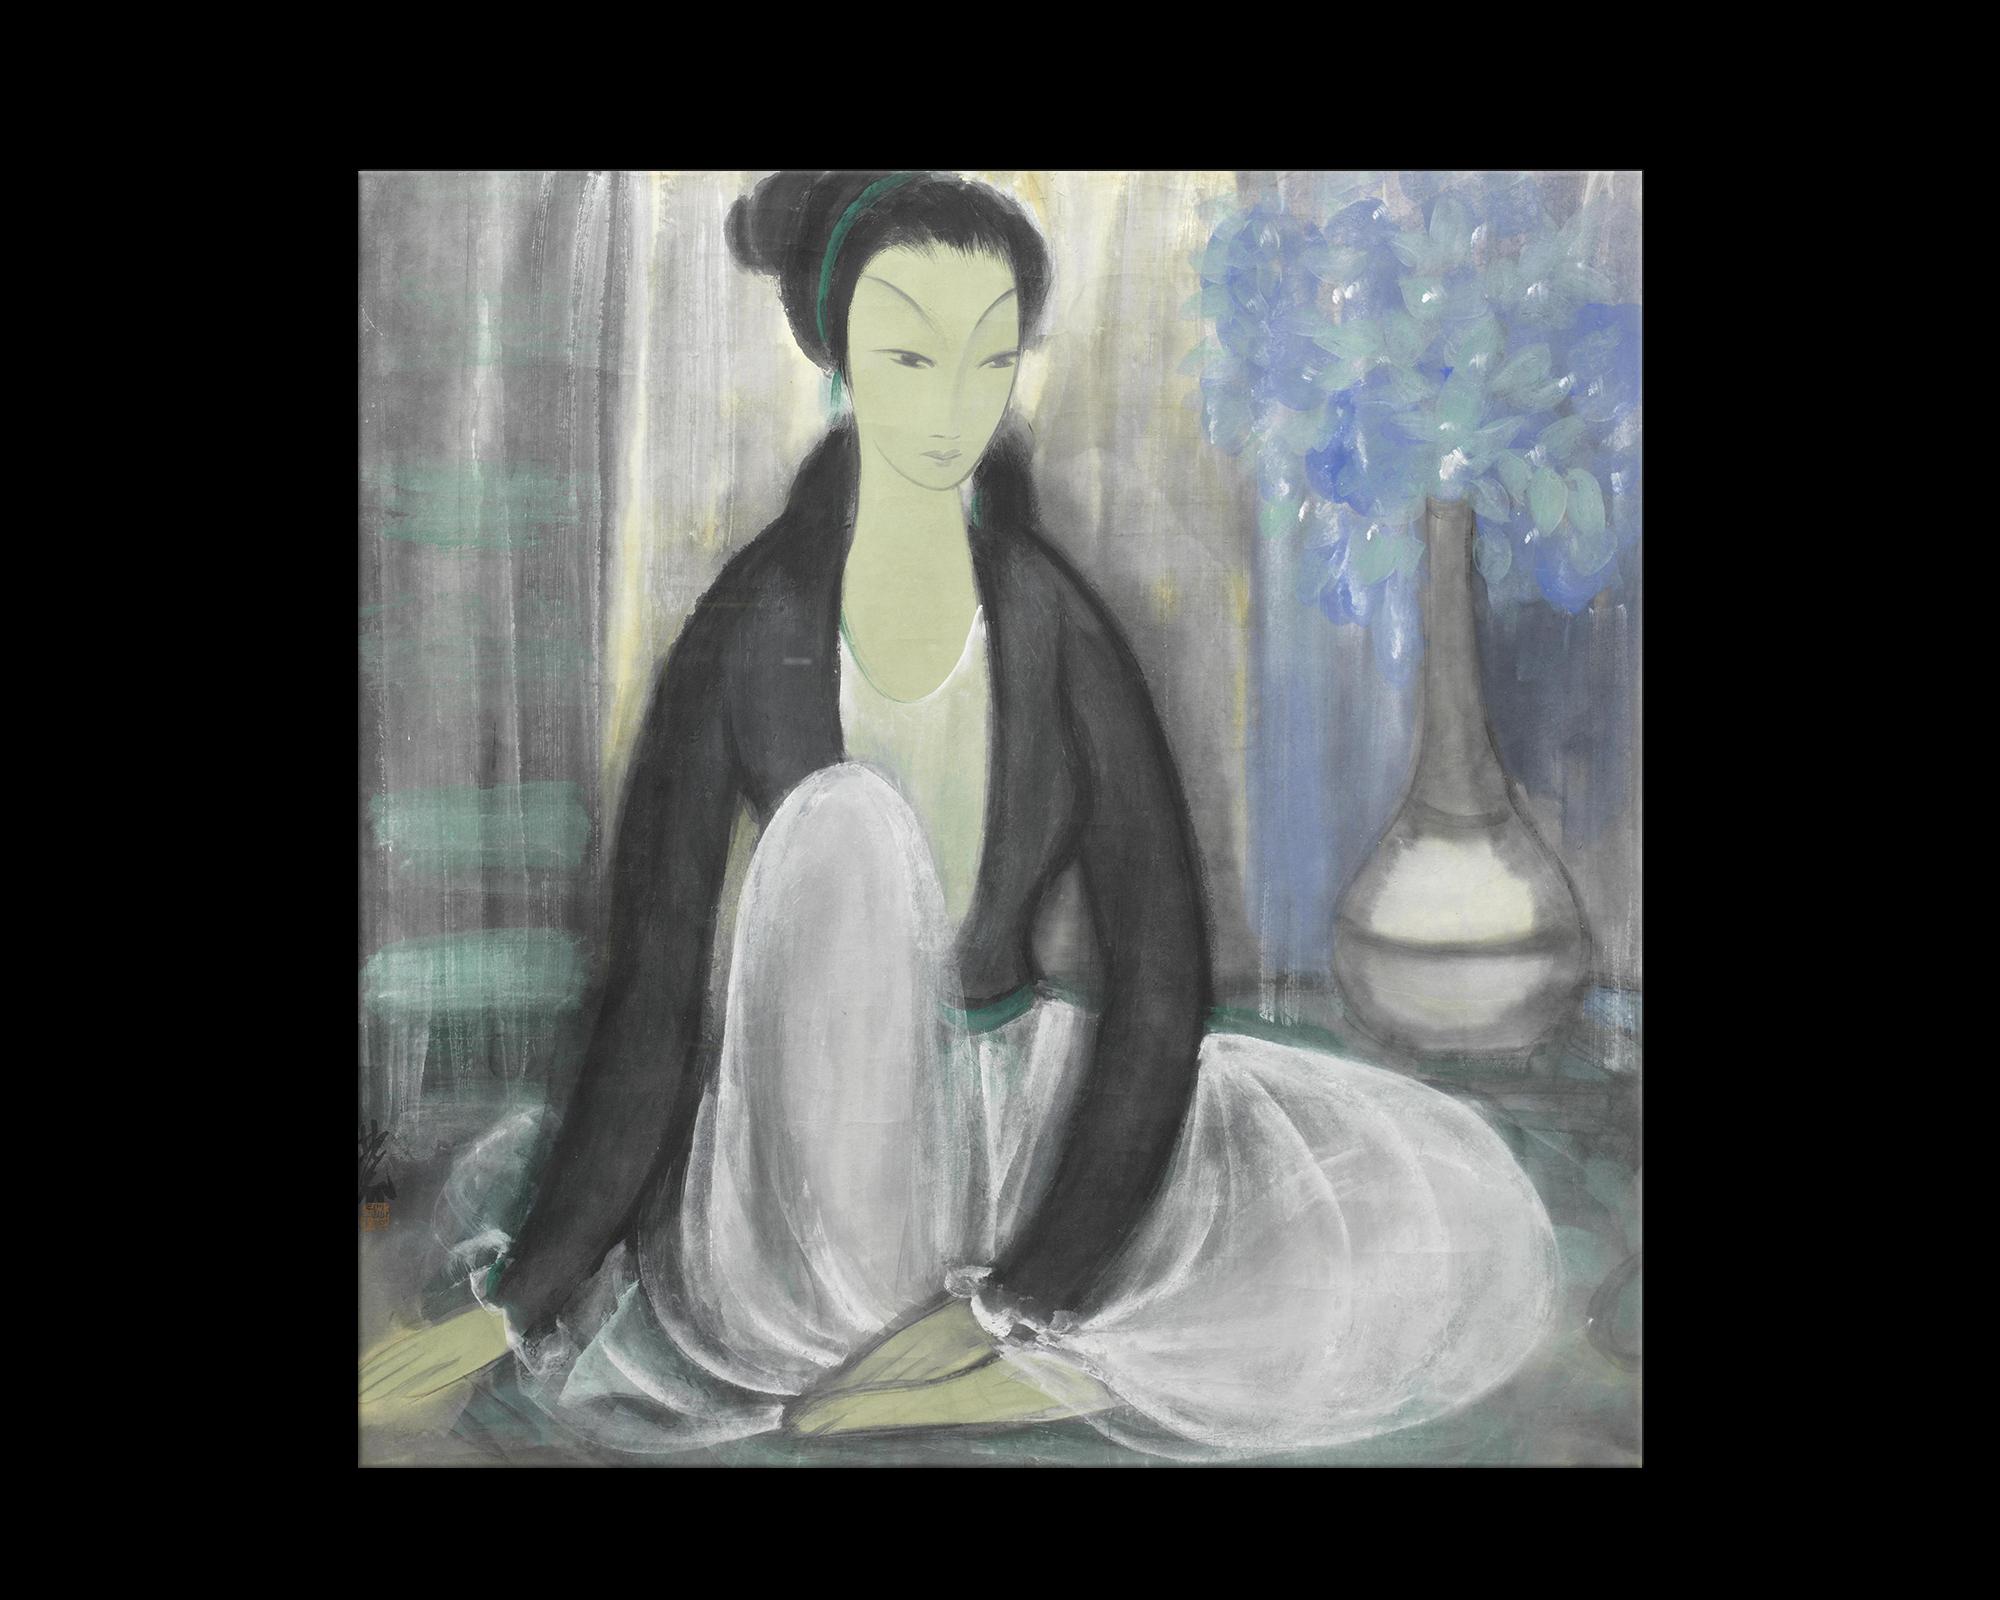 This large, Ming Dynasty style painting is a faithful yet nuanced reproduction of 